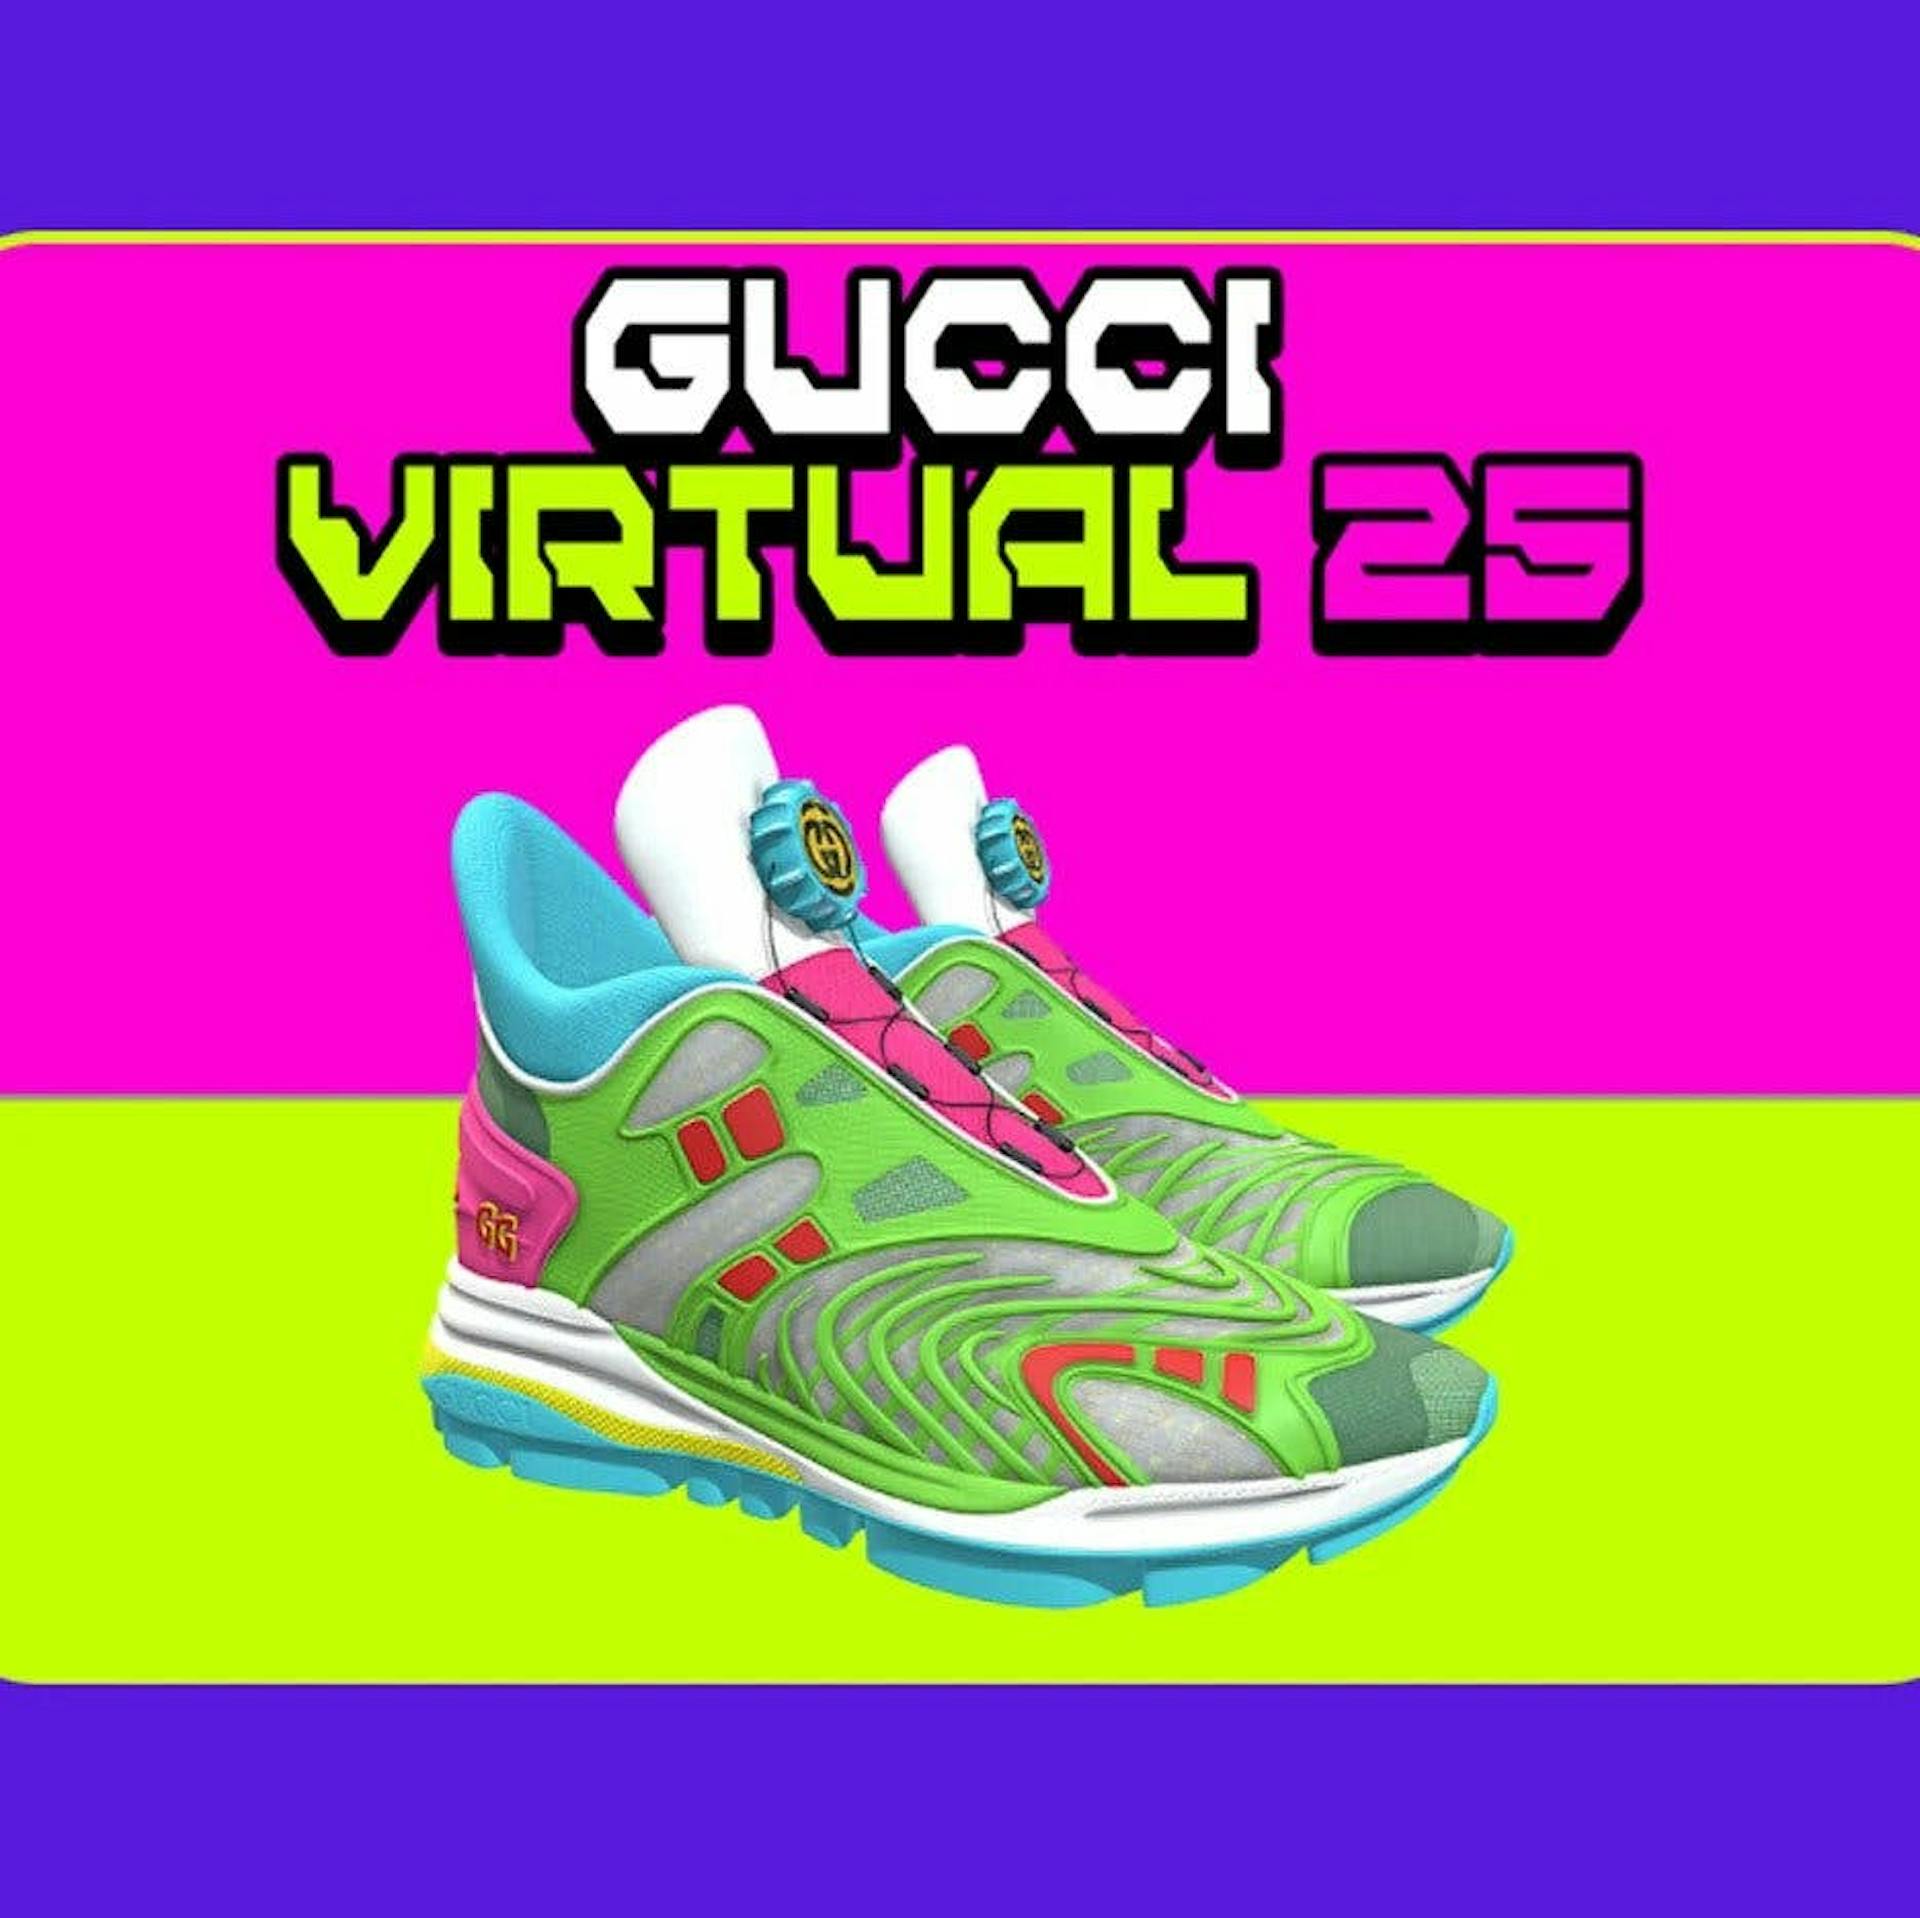 Gucci “Virtual 25” shoes are created exclusively for AR worlds. Source: Deezen.com